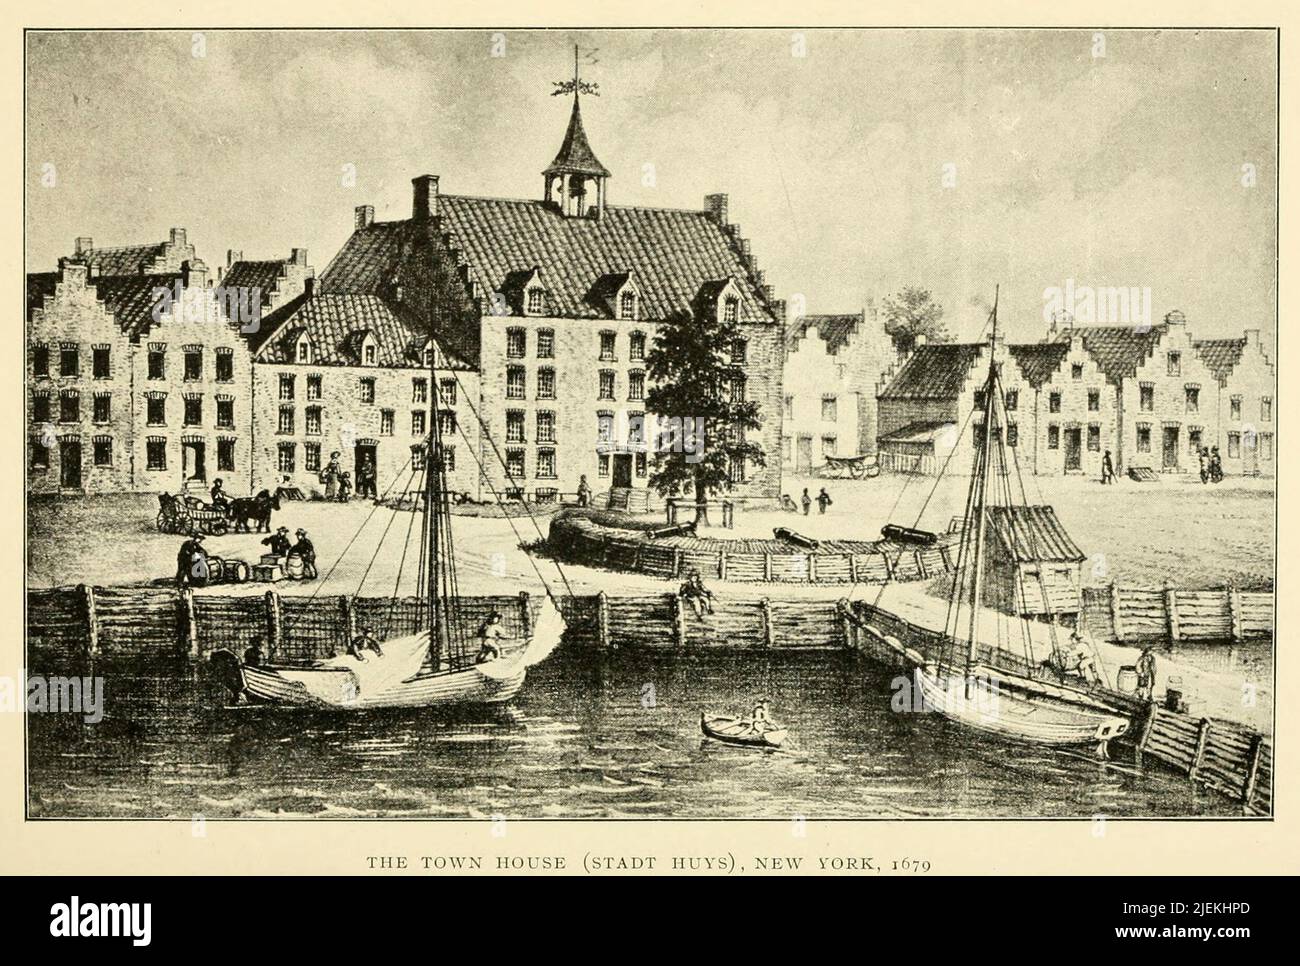 The Town House (Stadt Huys), New York, 1679 Foto Stock